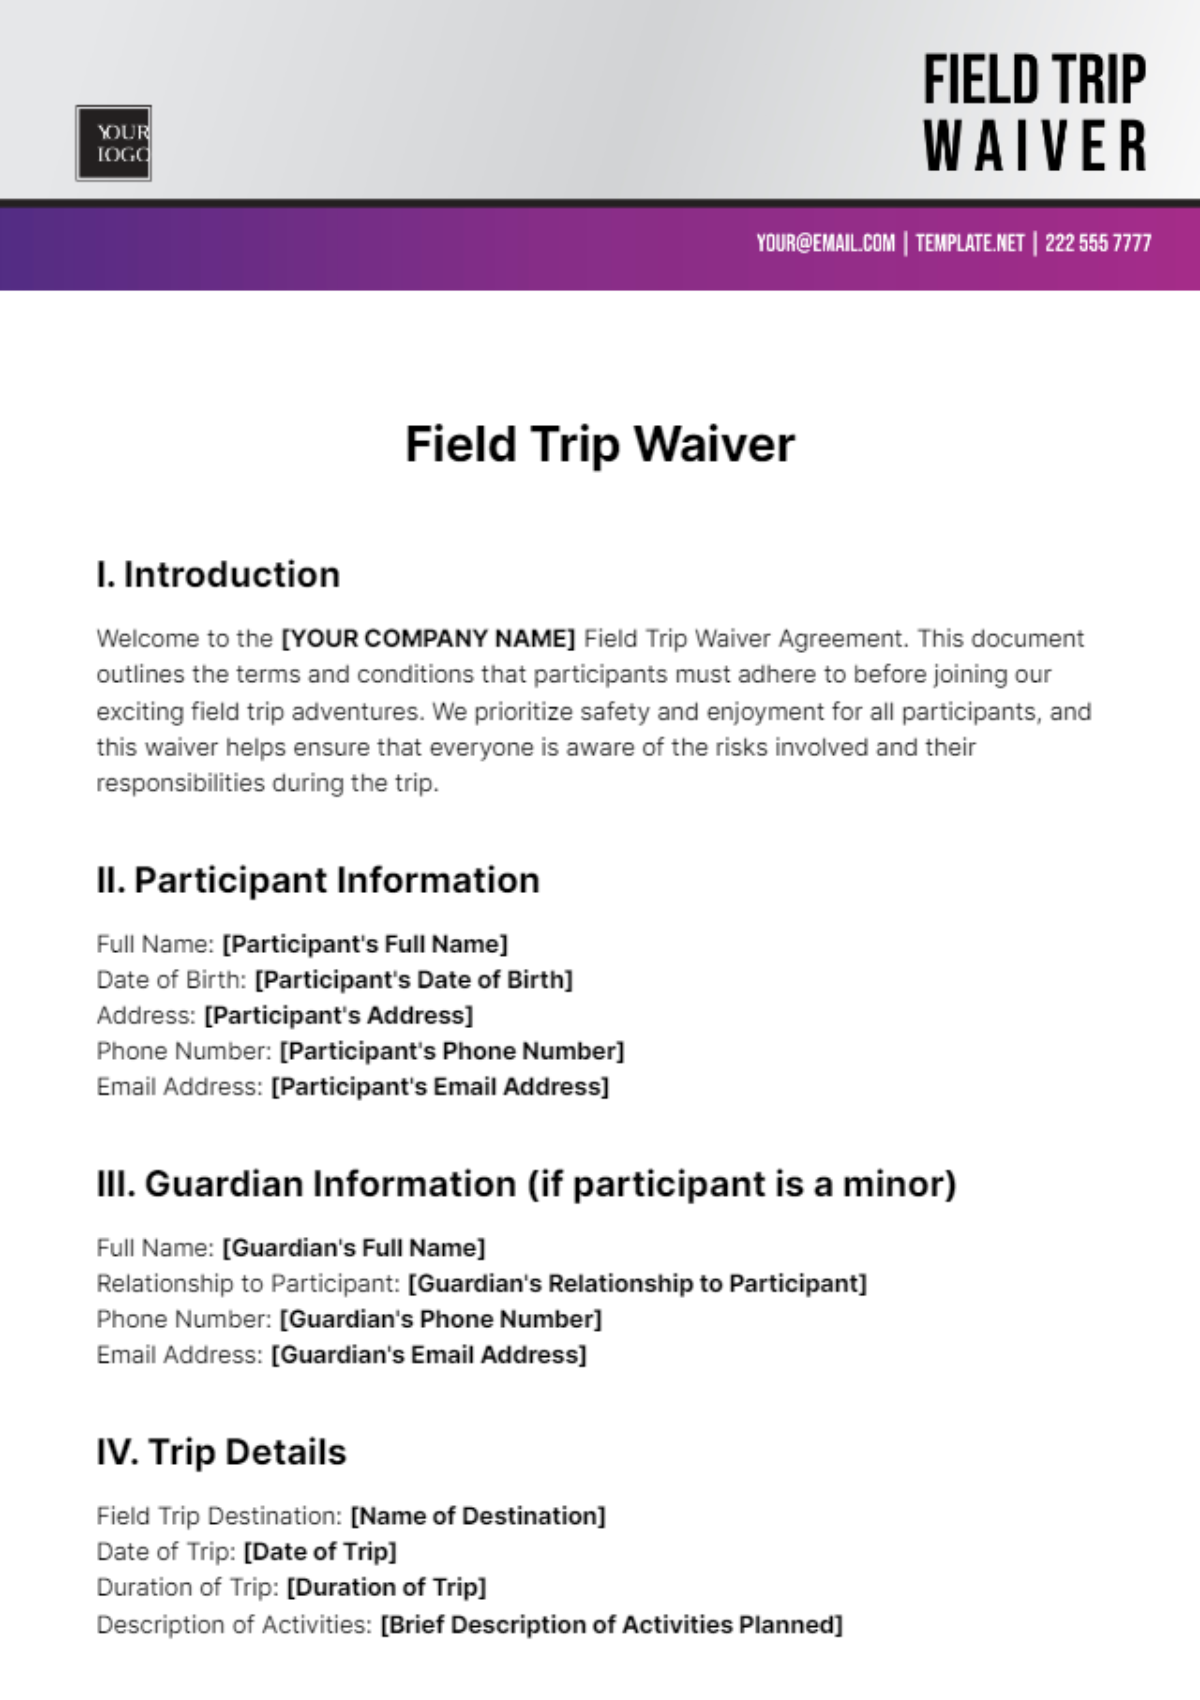 Field Trip Waiver Template